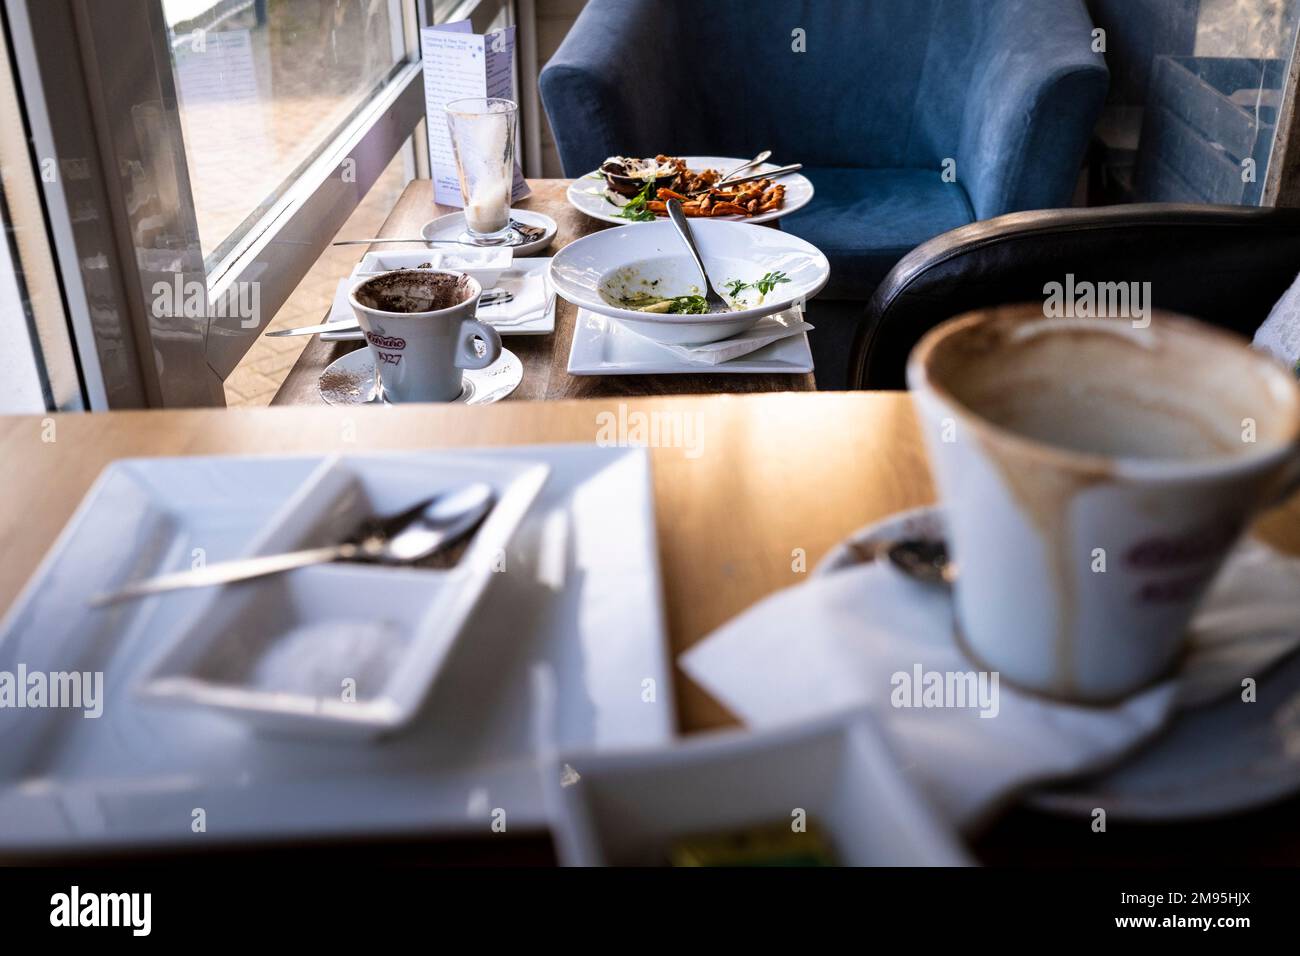 The remains of a meal on a table in a restaurant. Stock Photo